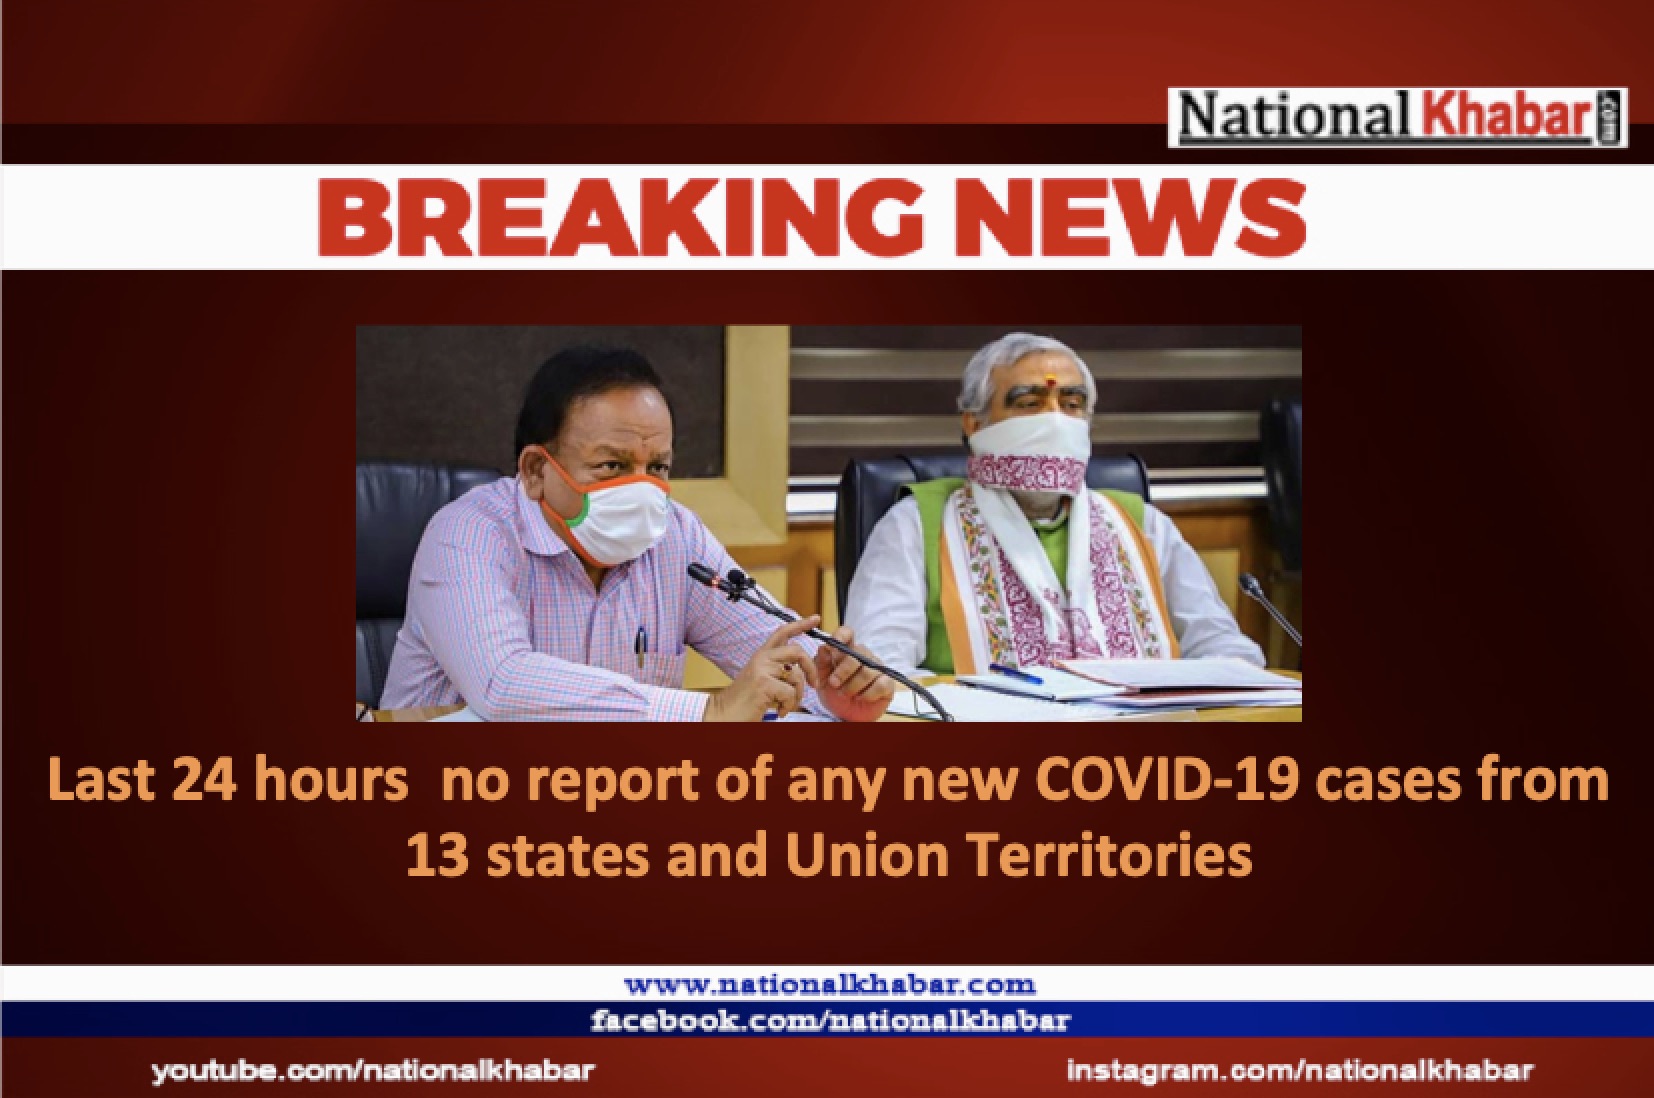 No new case of COVID-19 in the last 24 hours from 13 states and UTs